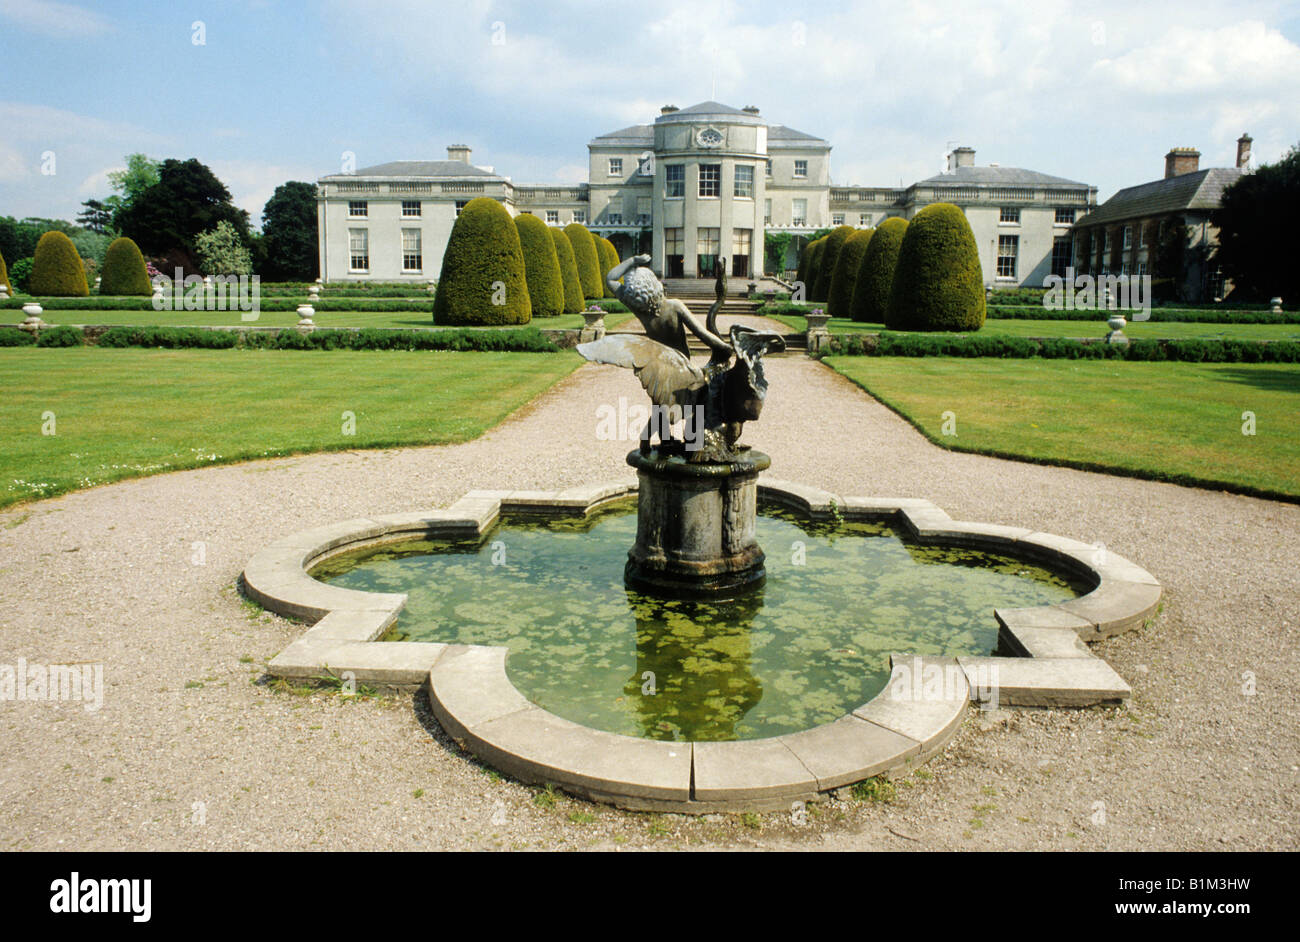 Shugborough Staffordshire house and formal garden Earl of Lichfield sately home England UK fountain pond Stock Photo